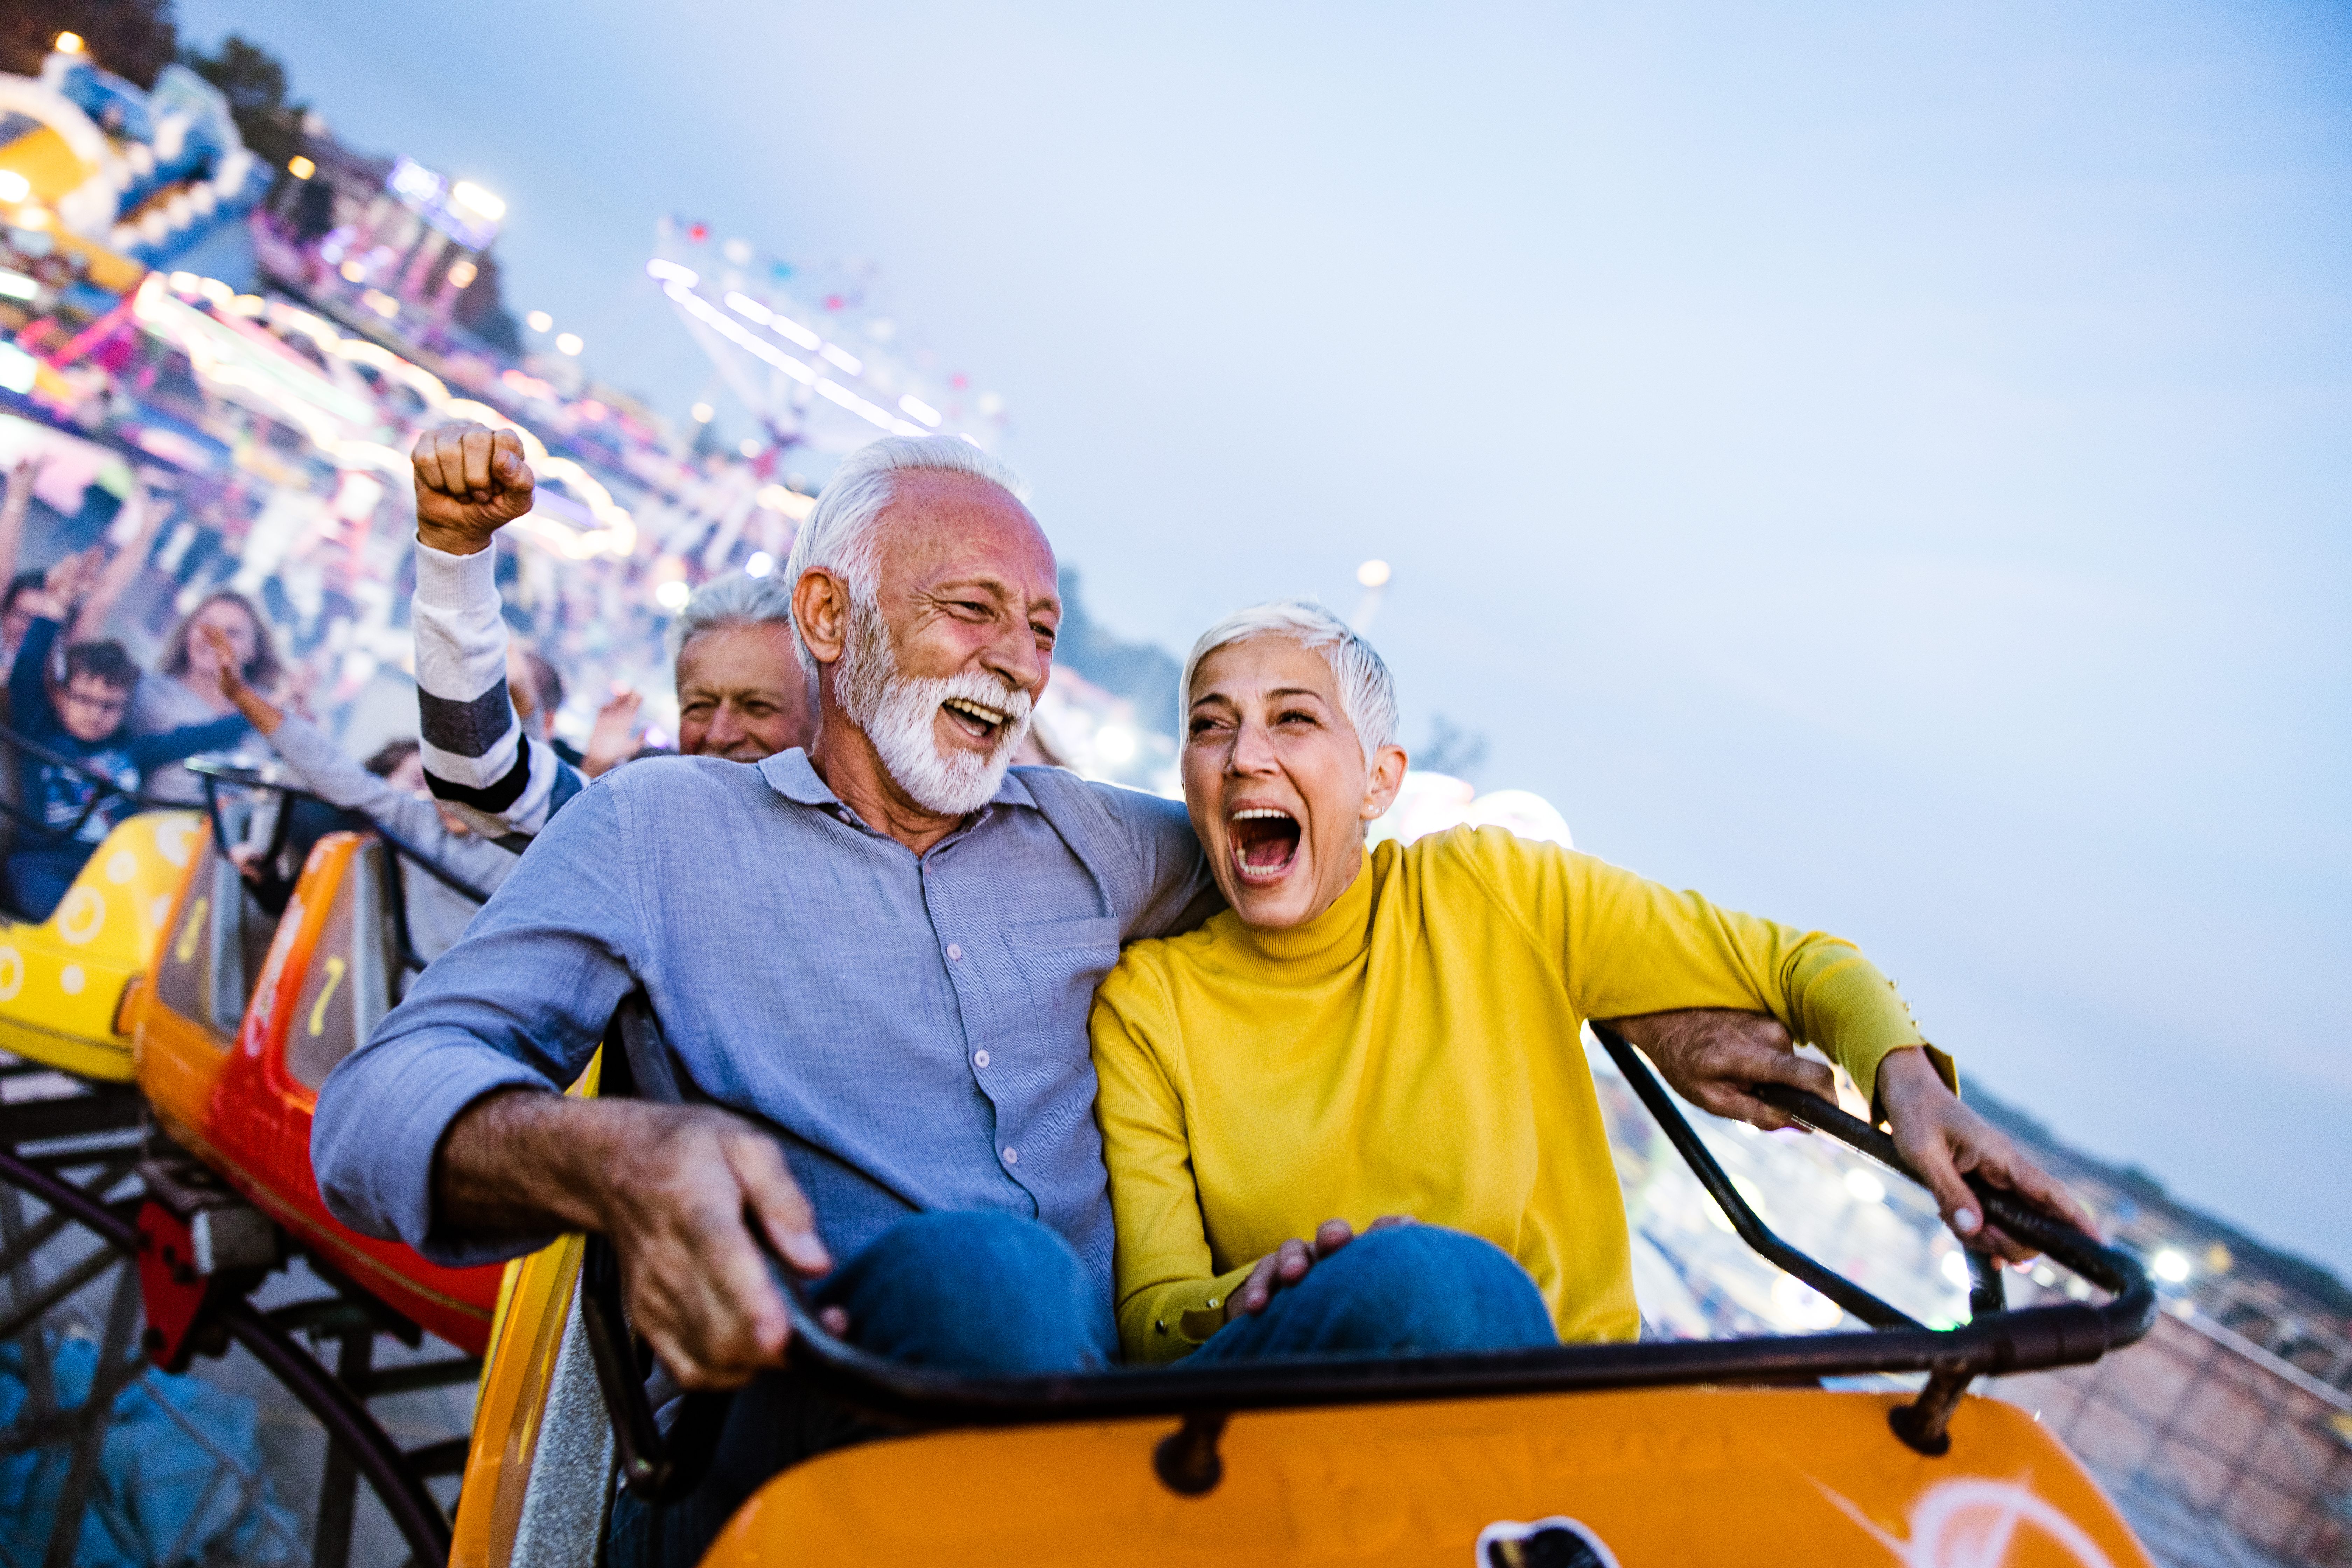 Retired couple riding a rollercoaster